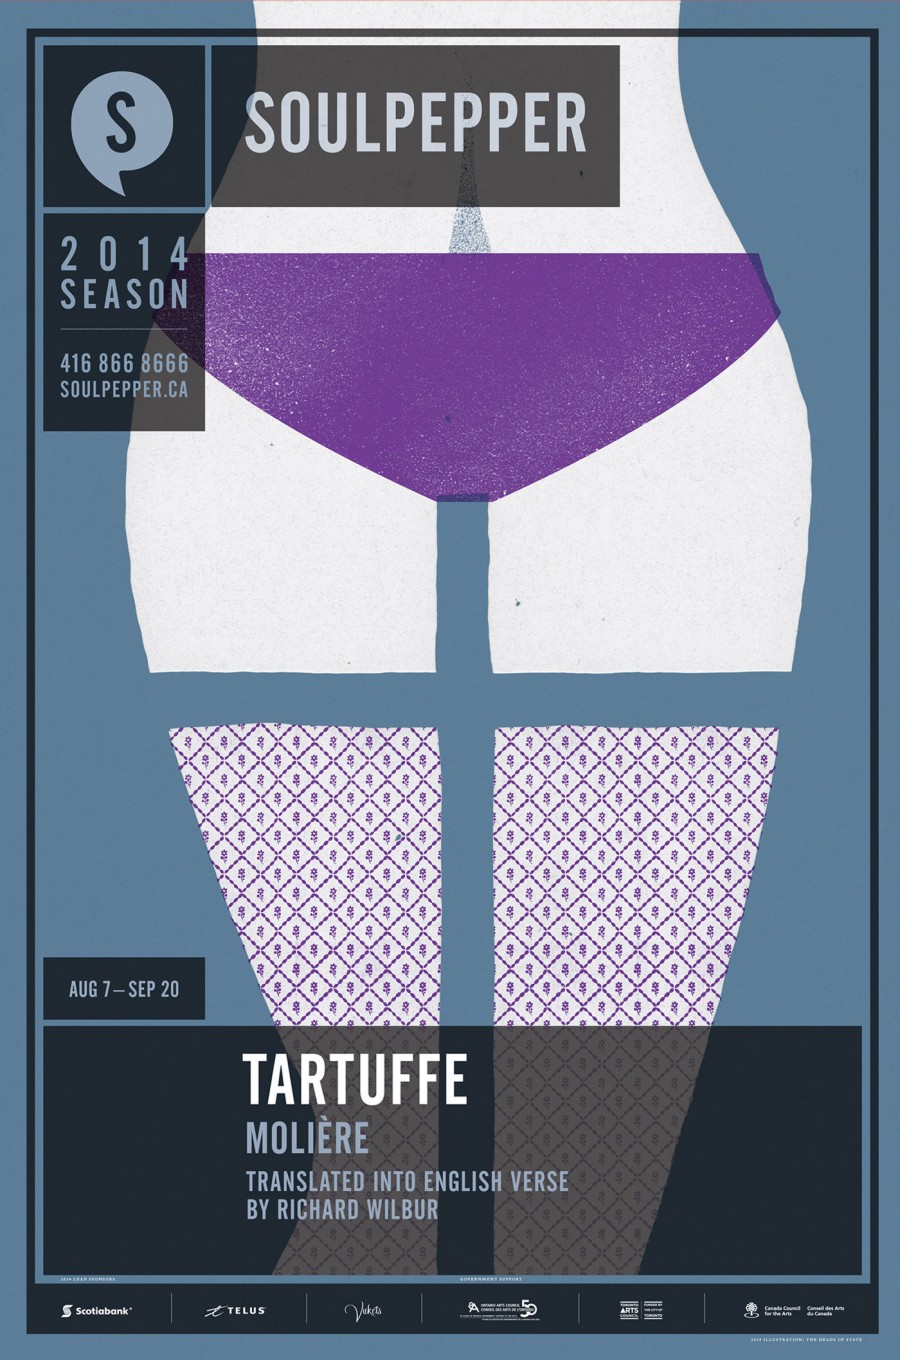 Tartuffe - Soulpepper Theatre - 2014 Season Poster Series - The Heads of State